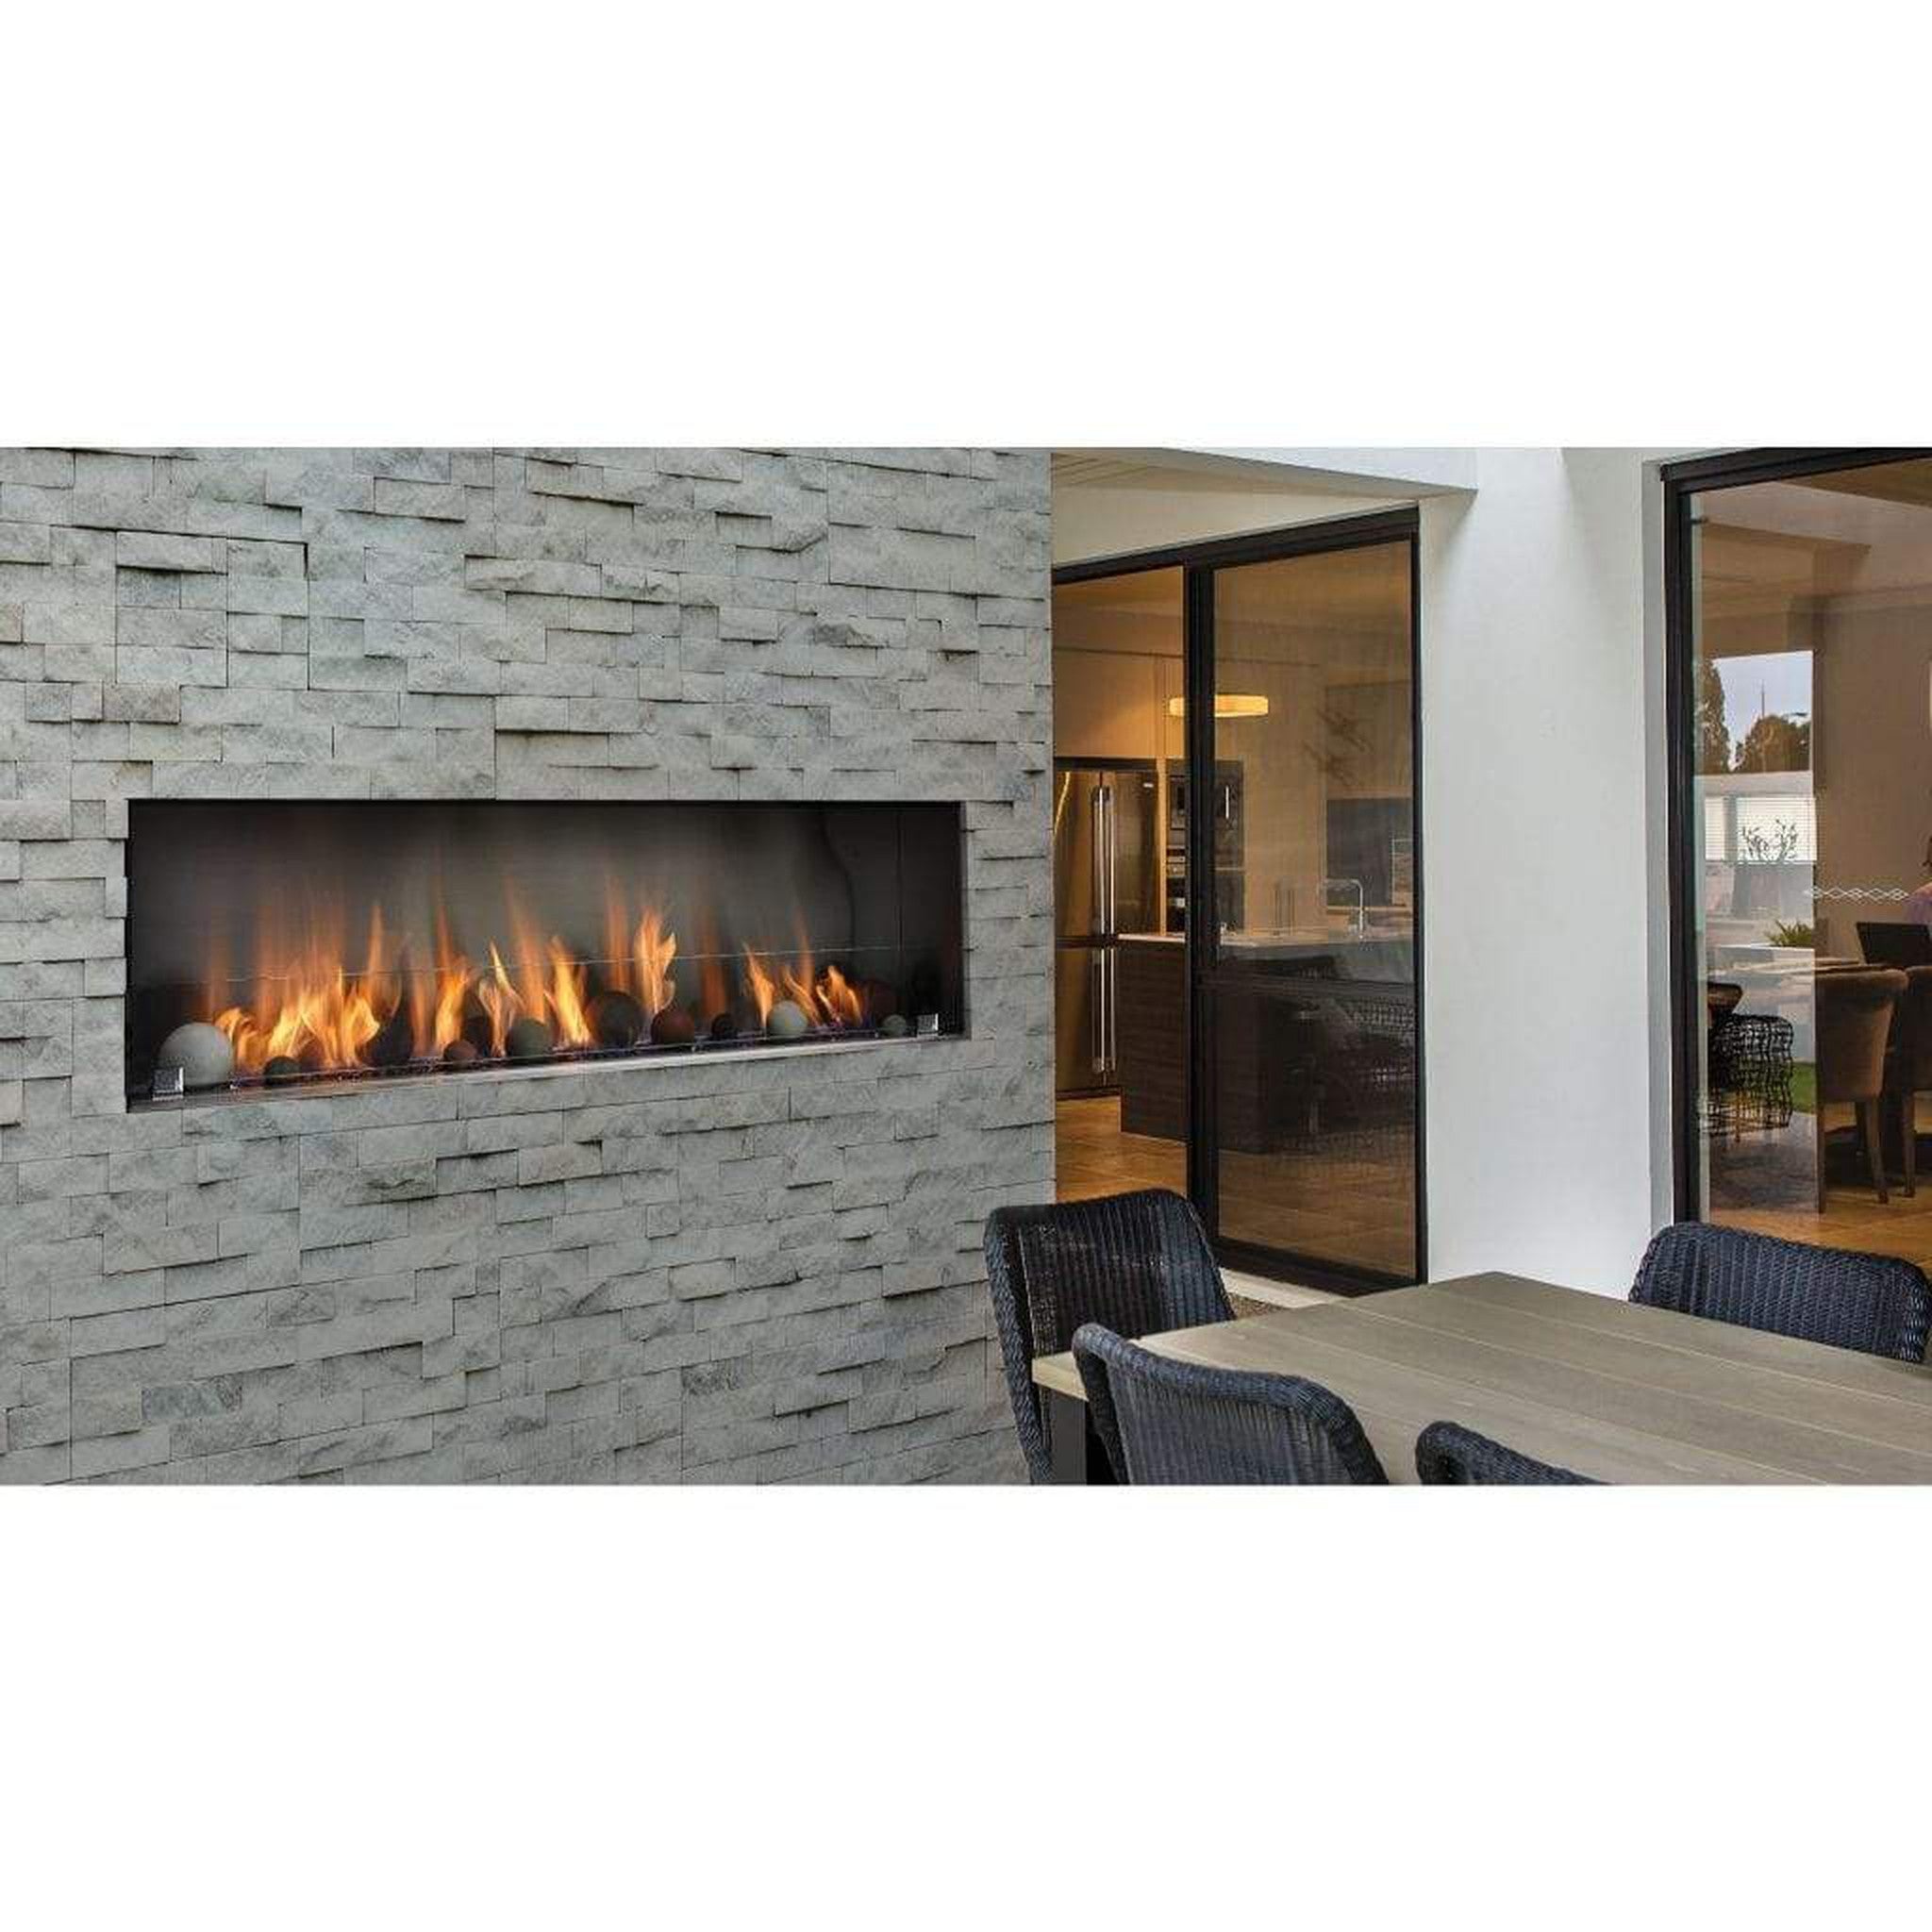 Barbara Jean Fireplaces – Extend Your Evenings in Style